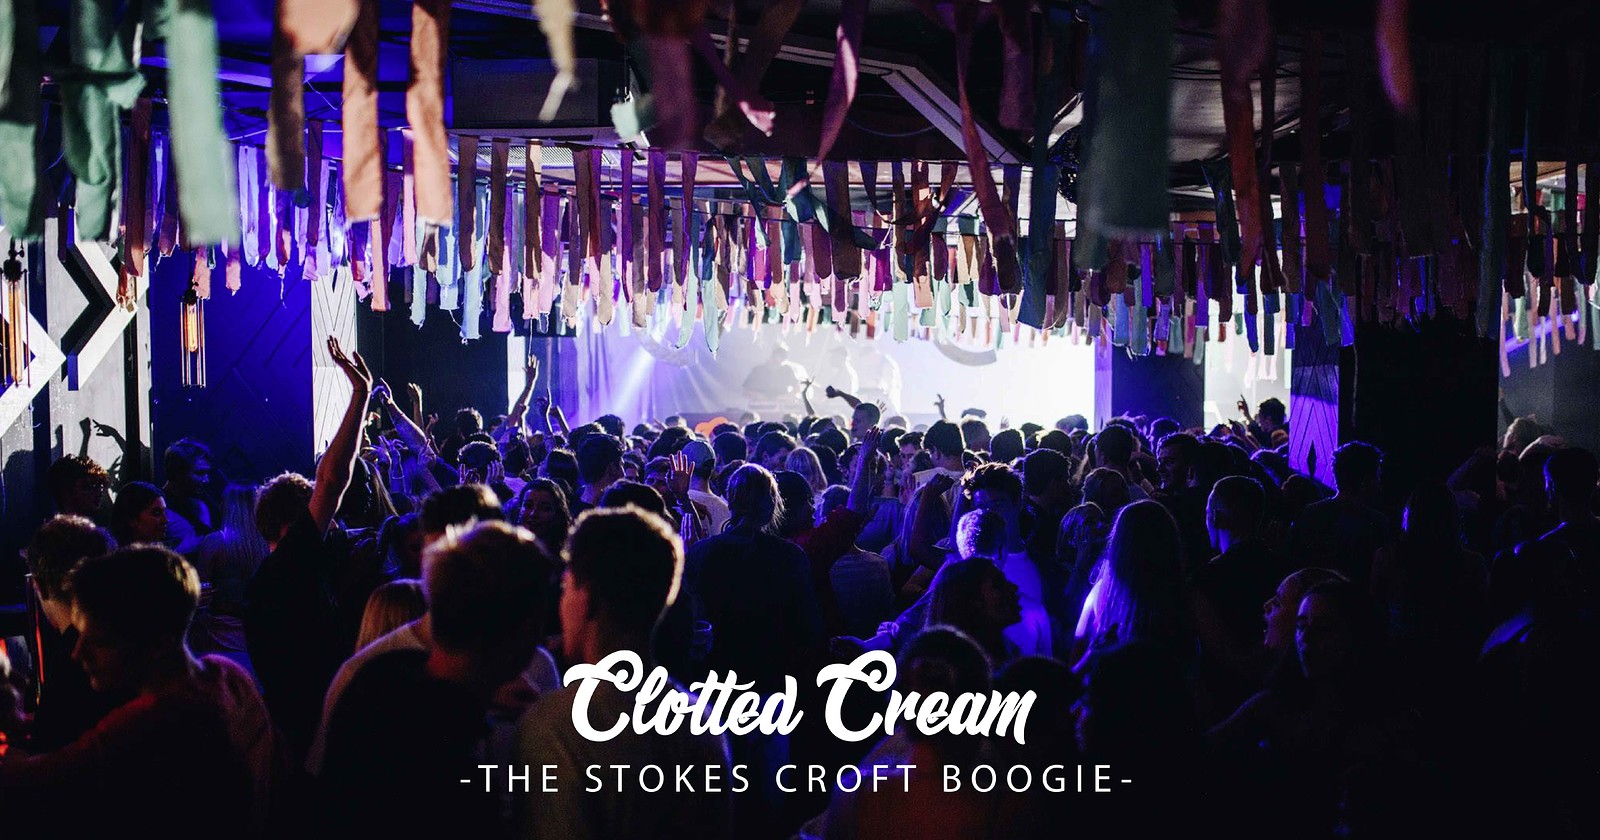 Clotted Cream: The Stokes Croft Boogie at The Coroner's Court